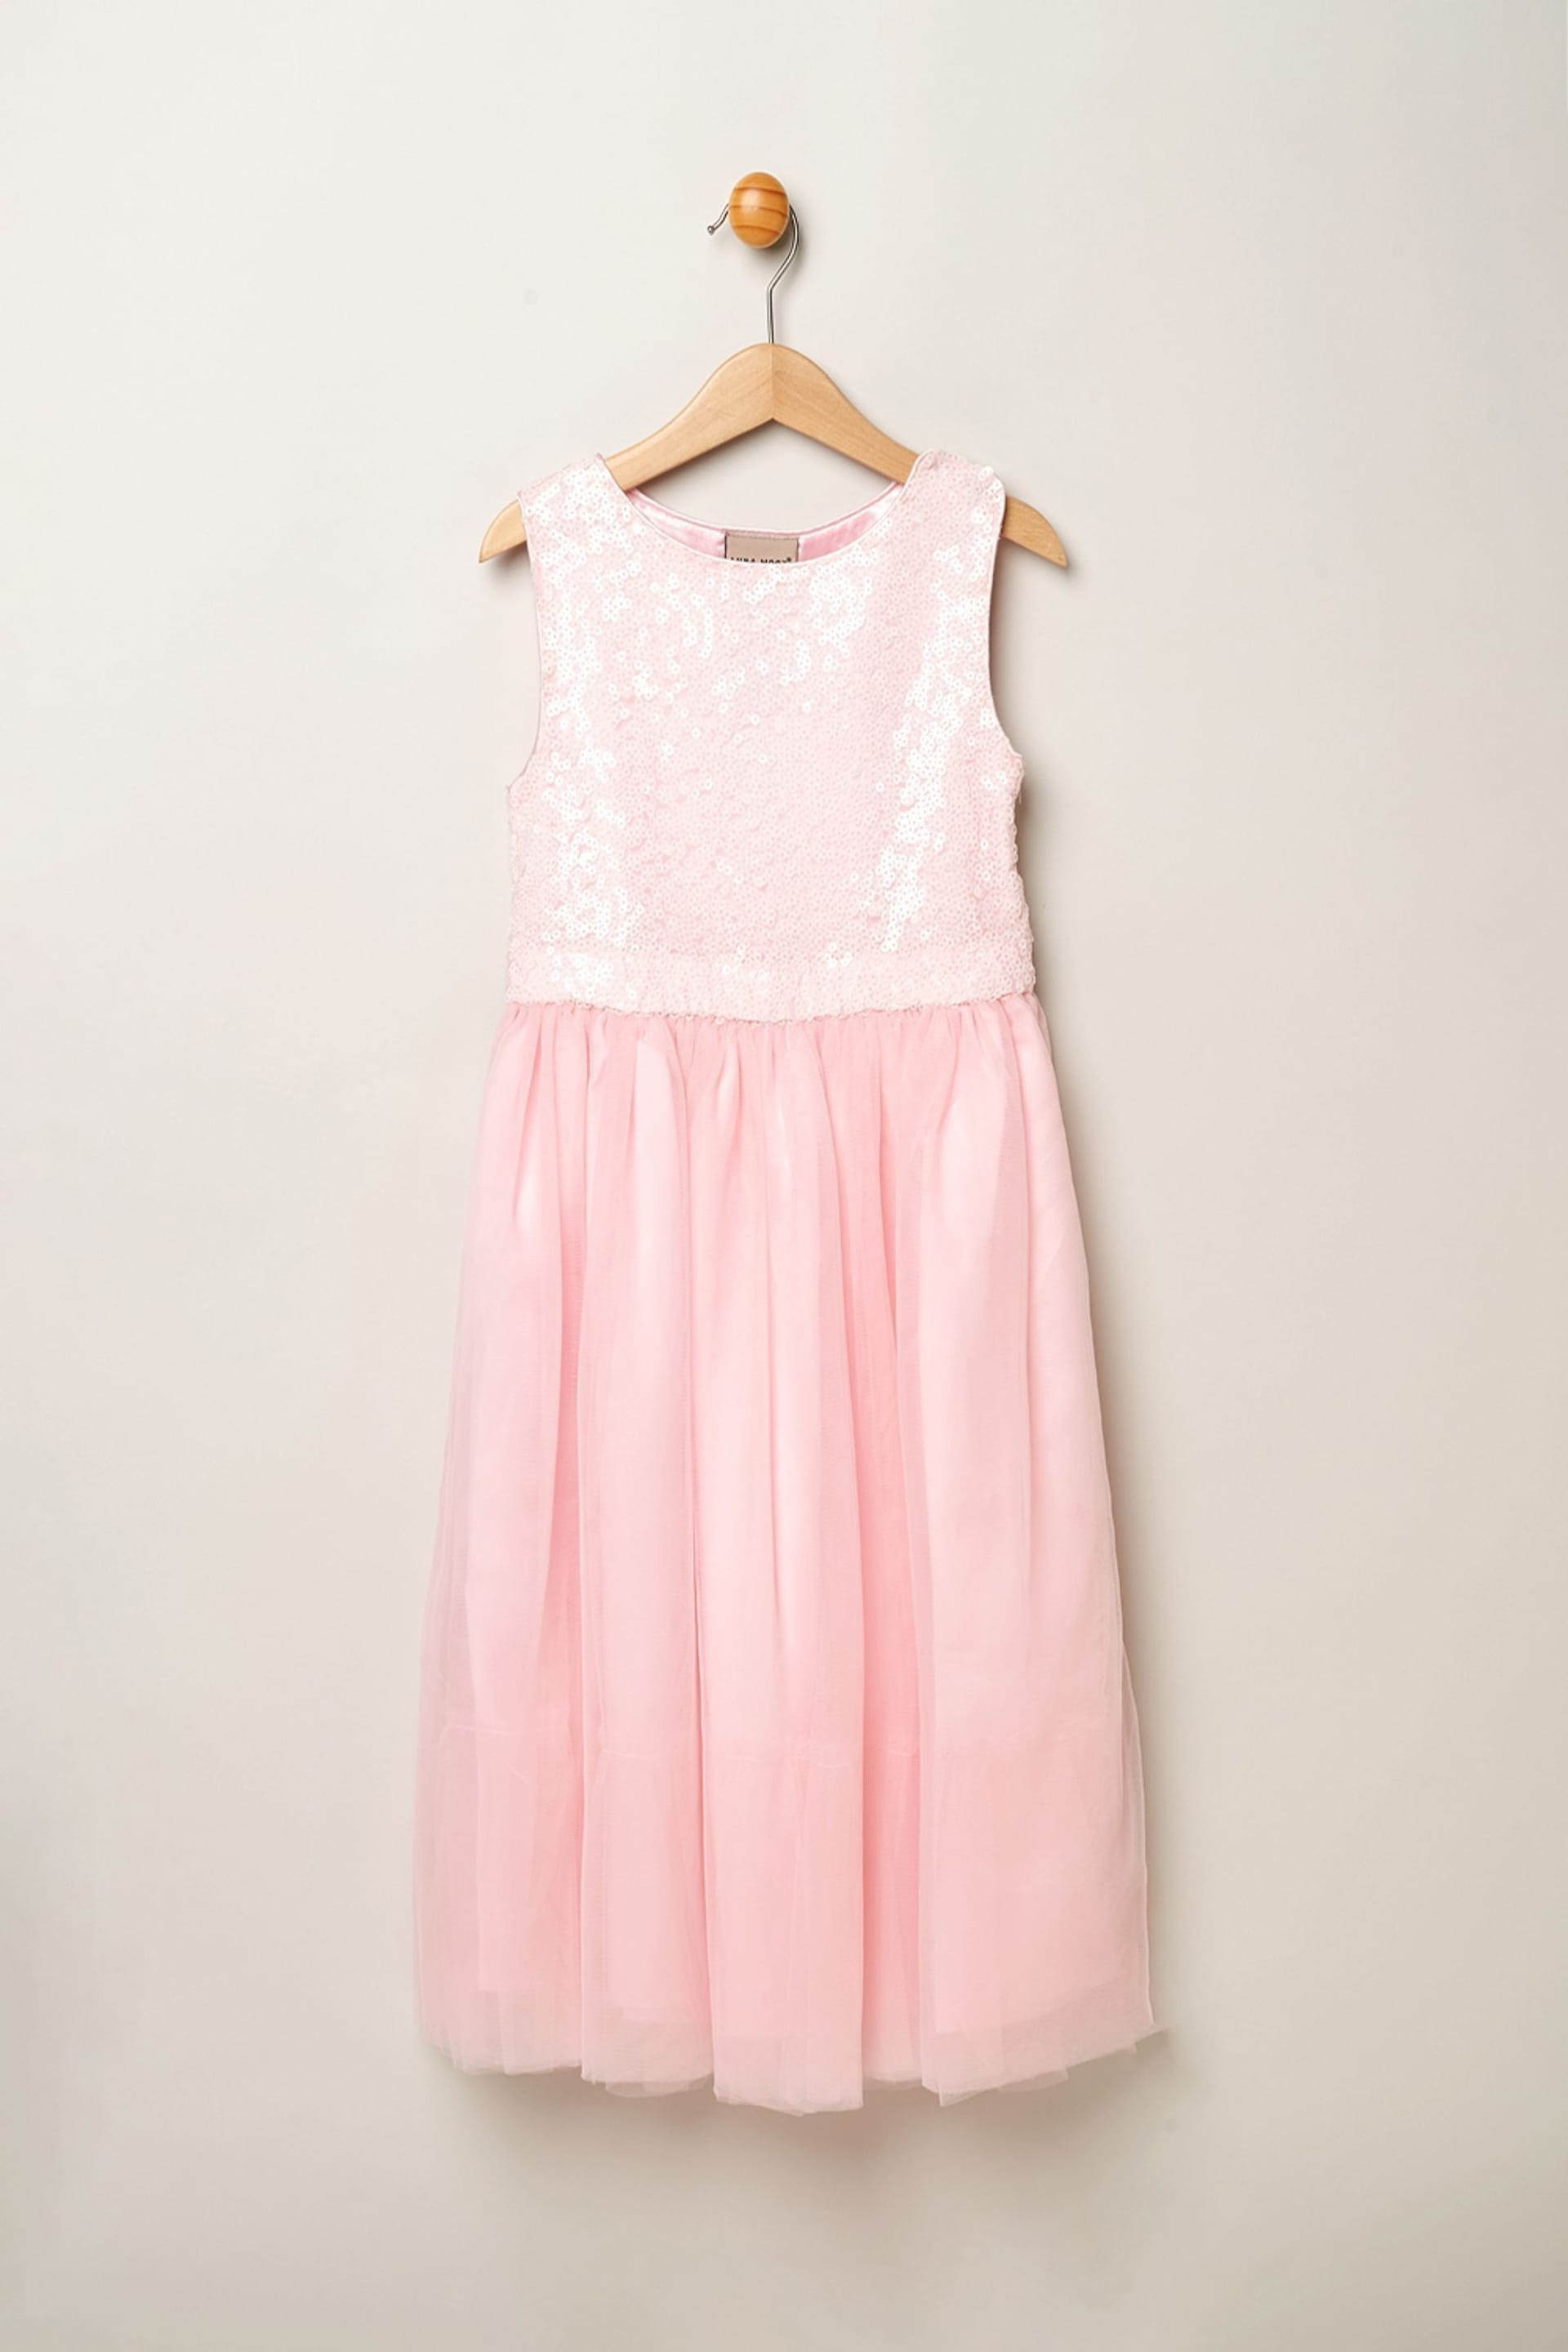 Miss Pink Sequin Bow Tulle Skirt Dress - Image 1 of 3